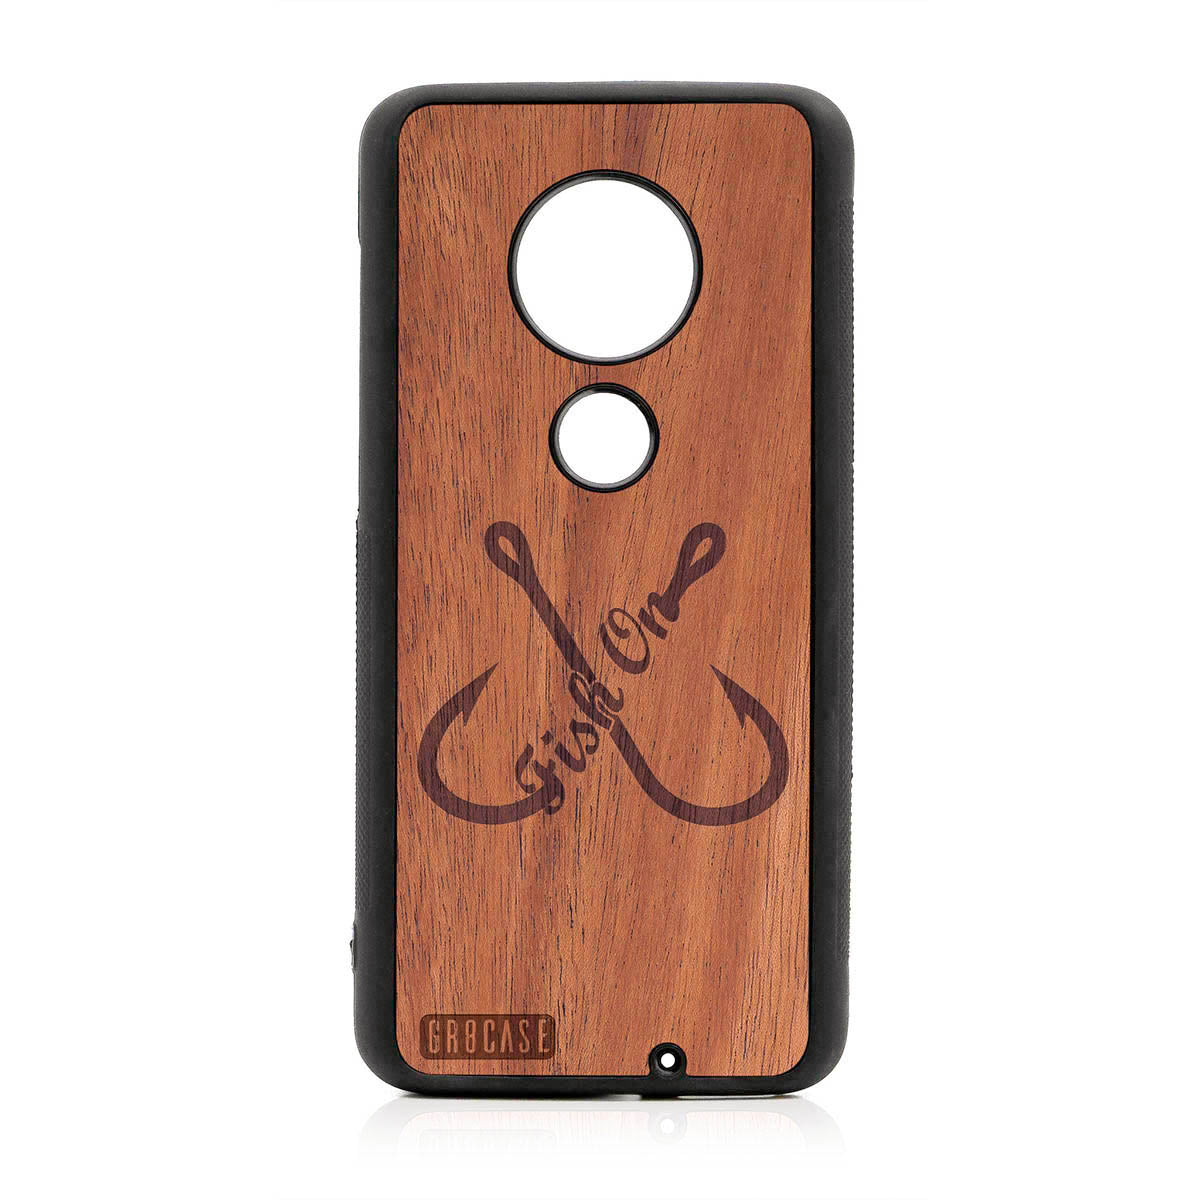 Fish On (Fish Hooks) Design Wood Case For Moto G7 Plus by GR8CASE